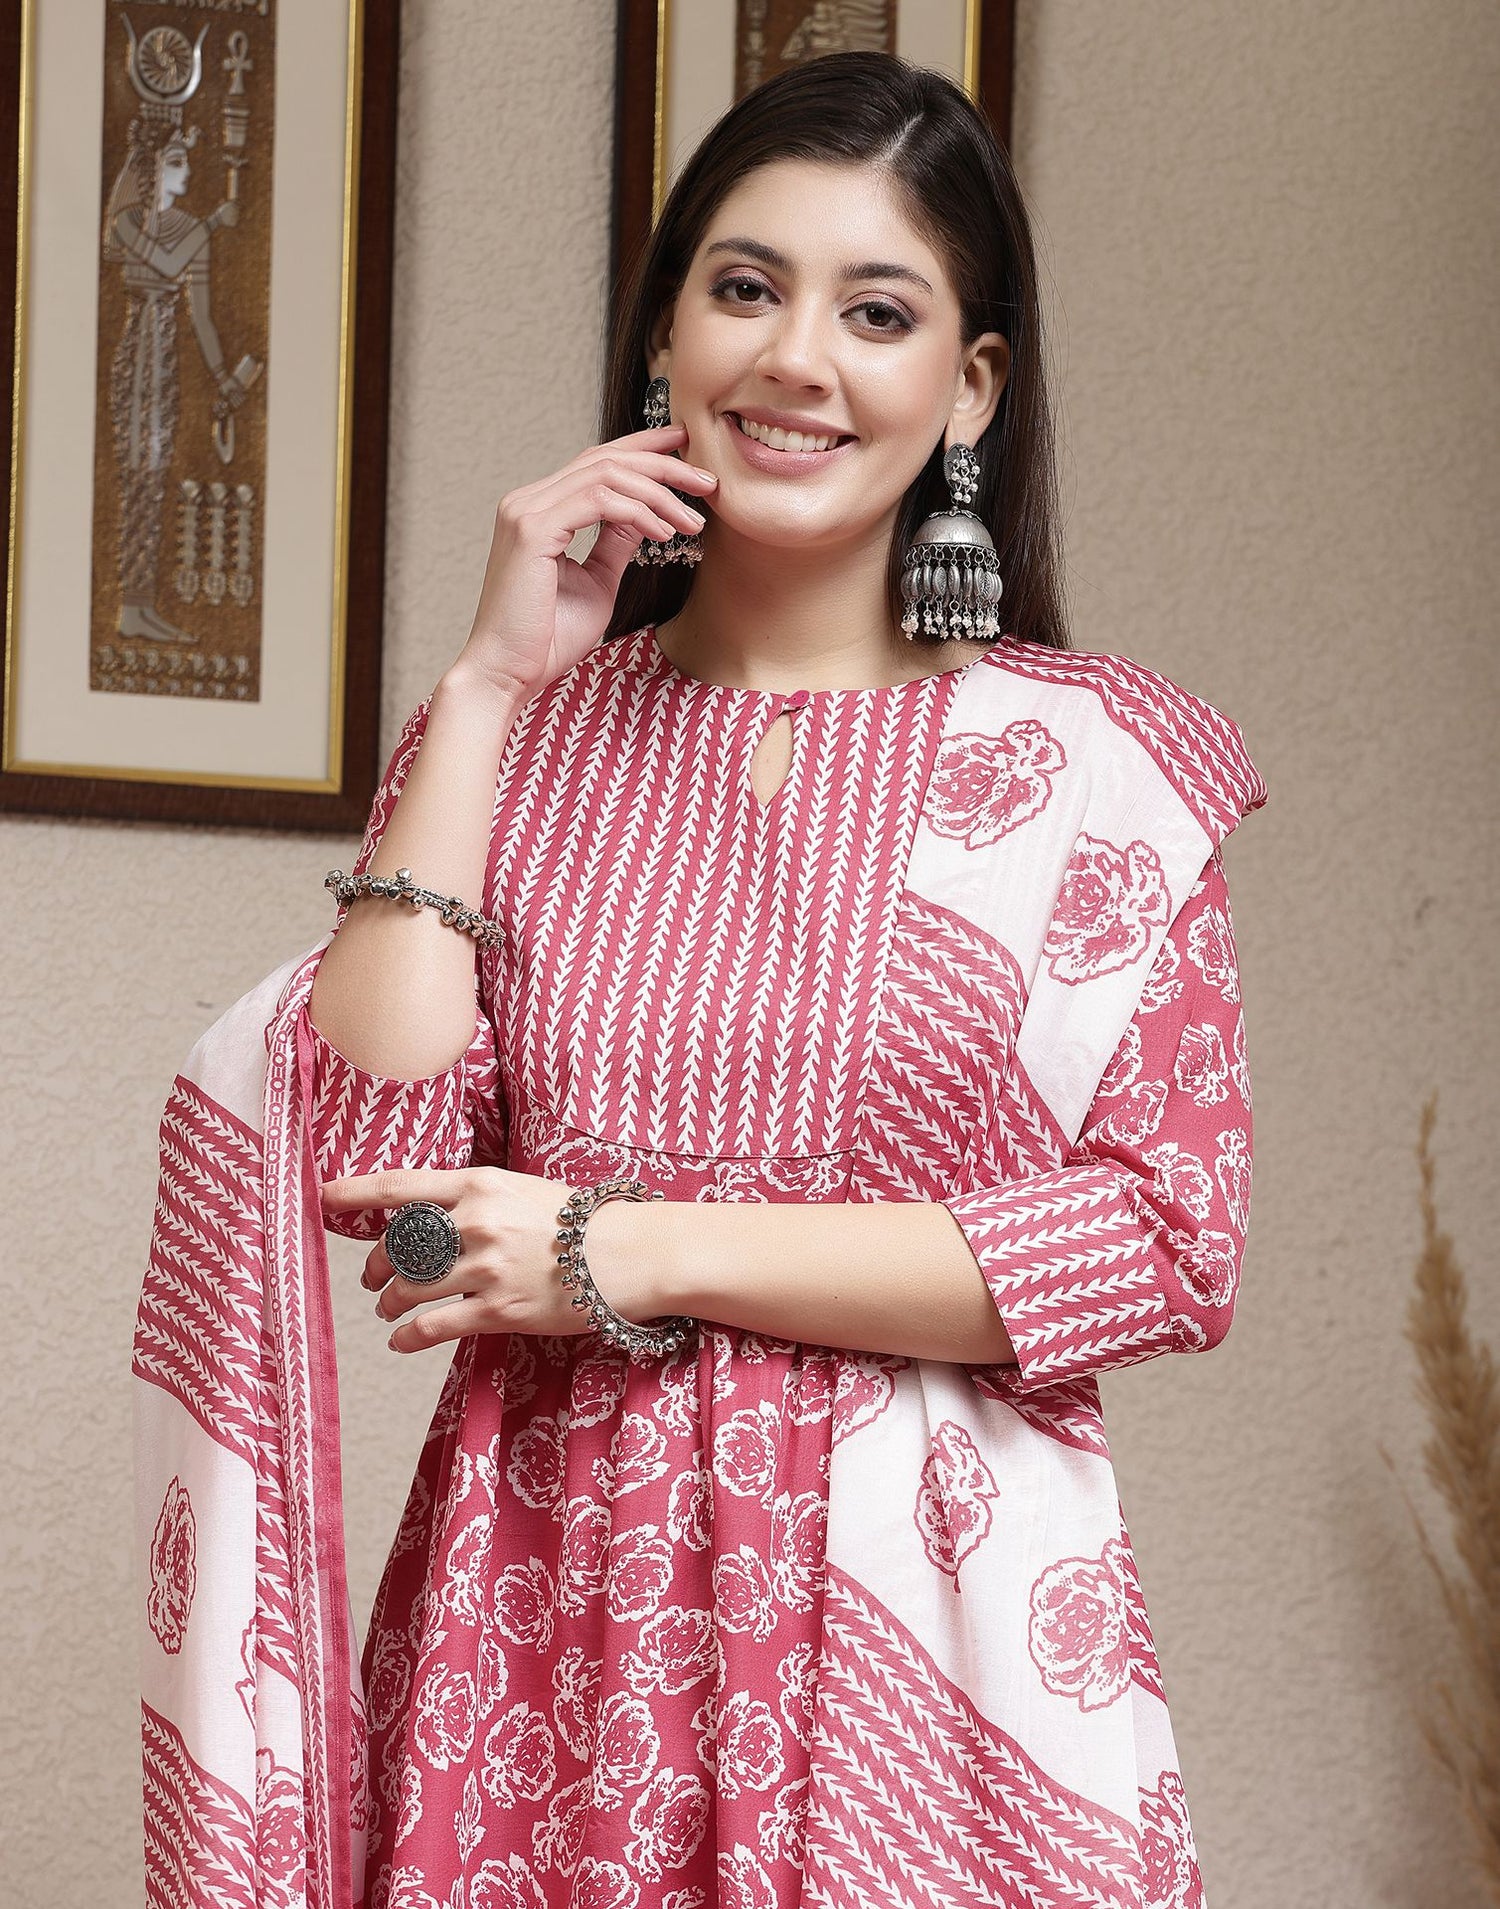 Pink Printed Cotton A-Line Kurta With Pant And Dupatta